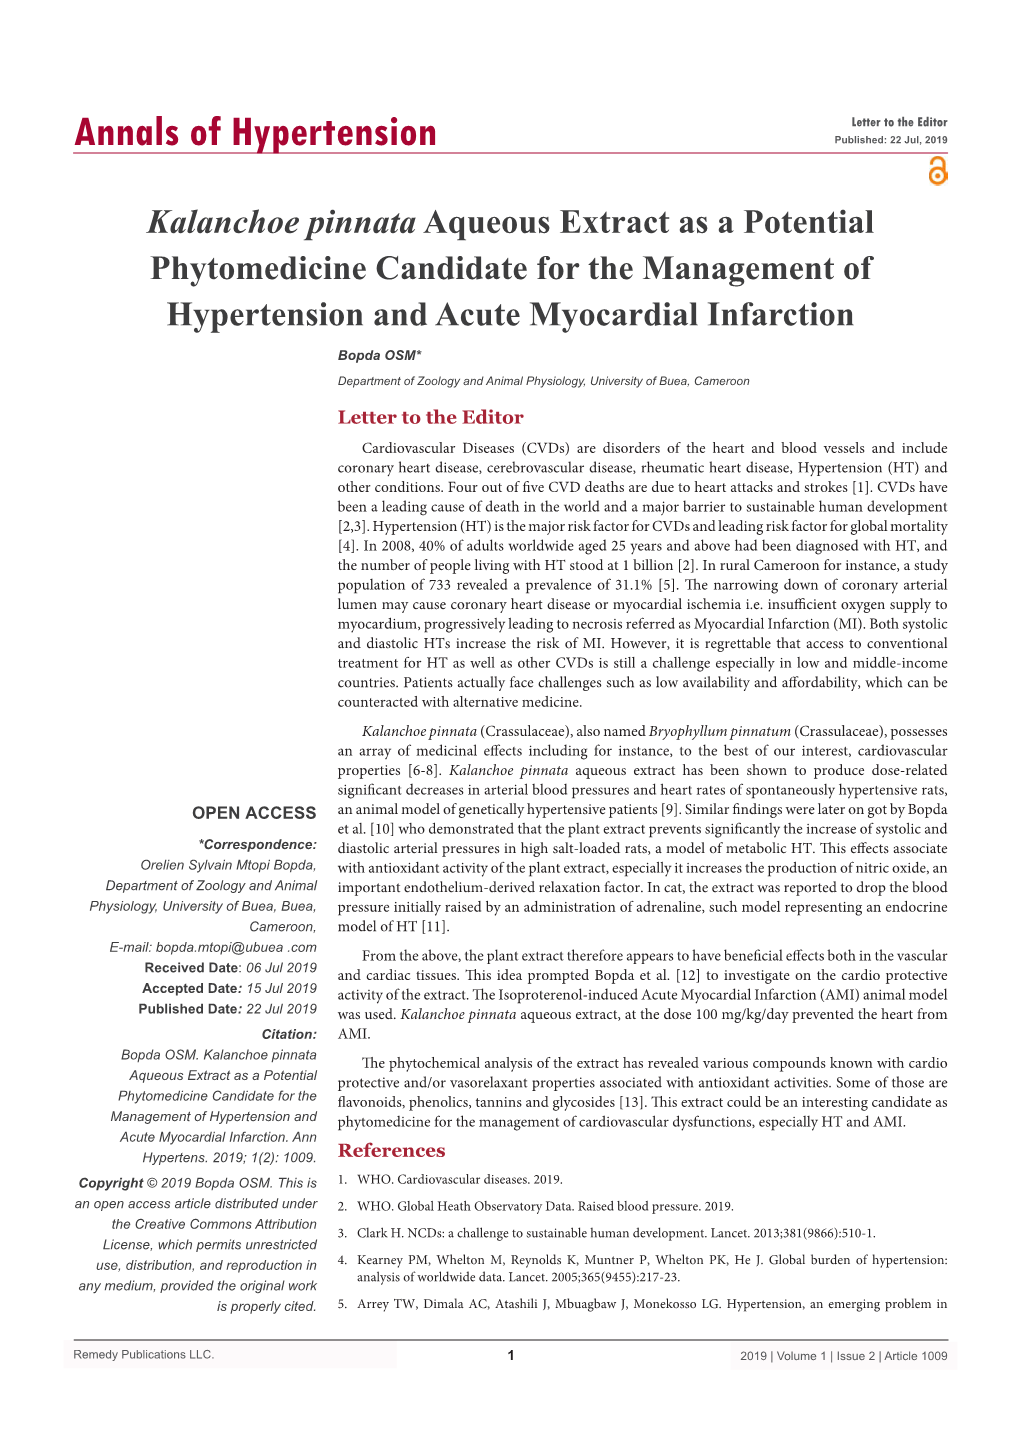 Kalanchoe Pinnata Aqueous Extract As a Potential Phytomedicine Candidate for the Management of Hypertension and Acute Myocardial Infarction